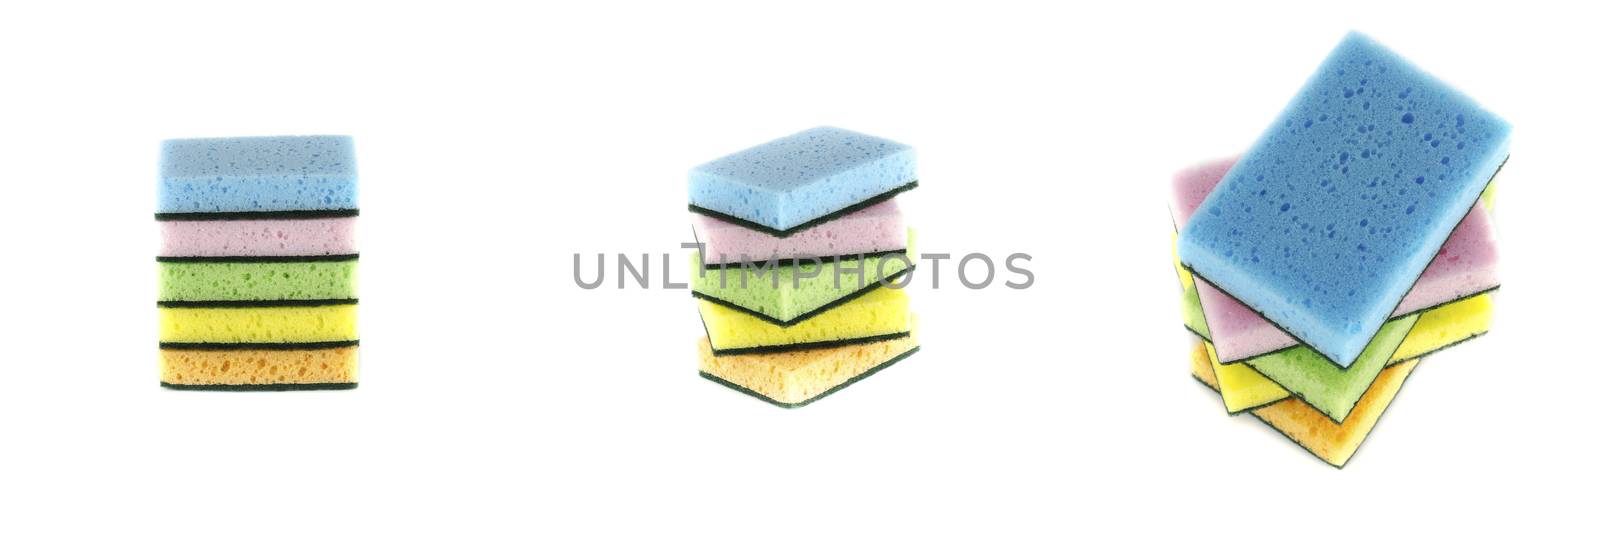 household cleaning sponge  by ammza12